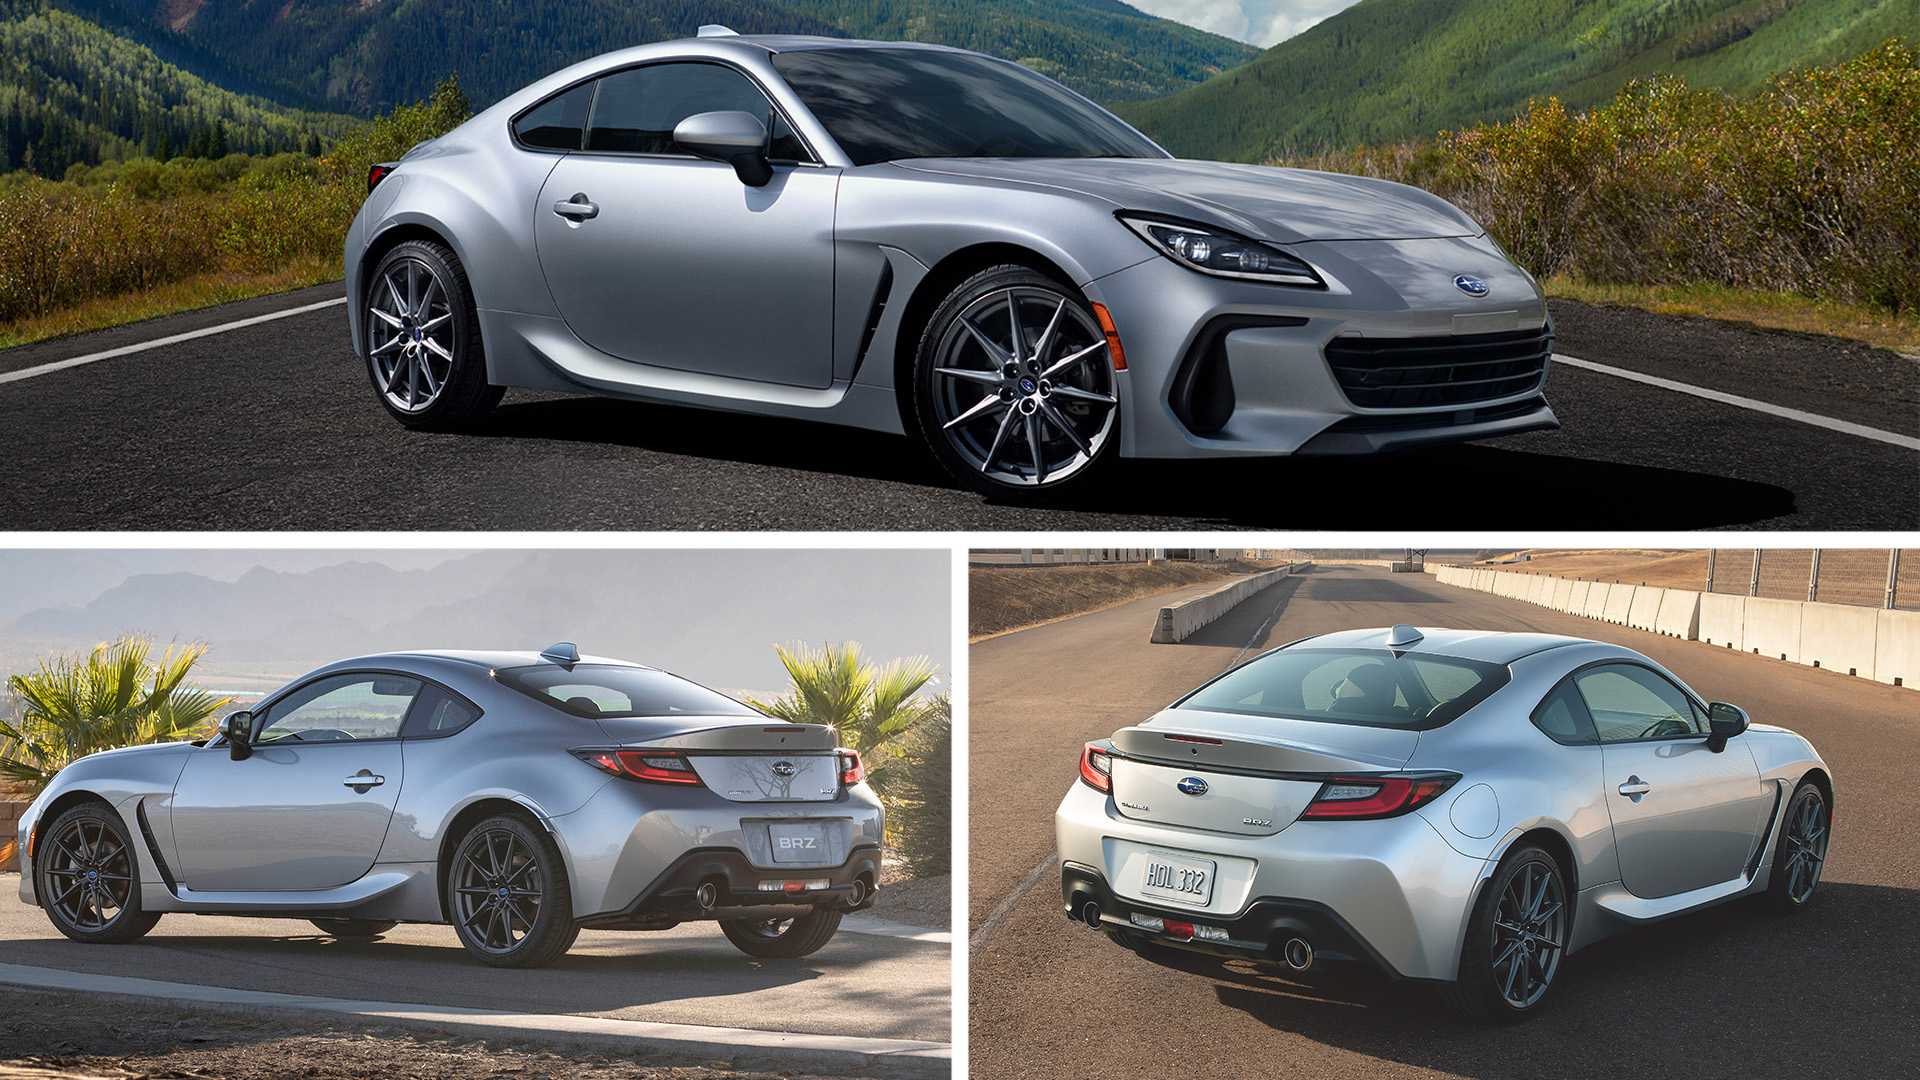 Rev Up Your Engine with the 2022 Subaru BRZ